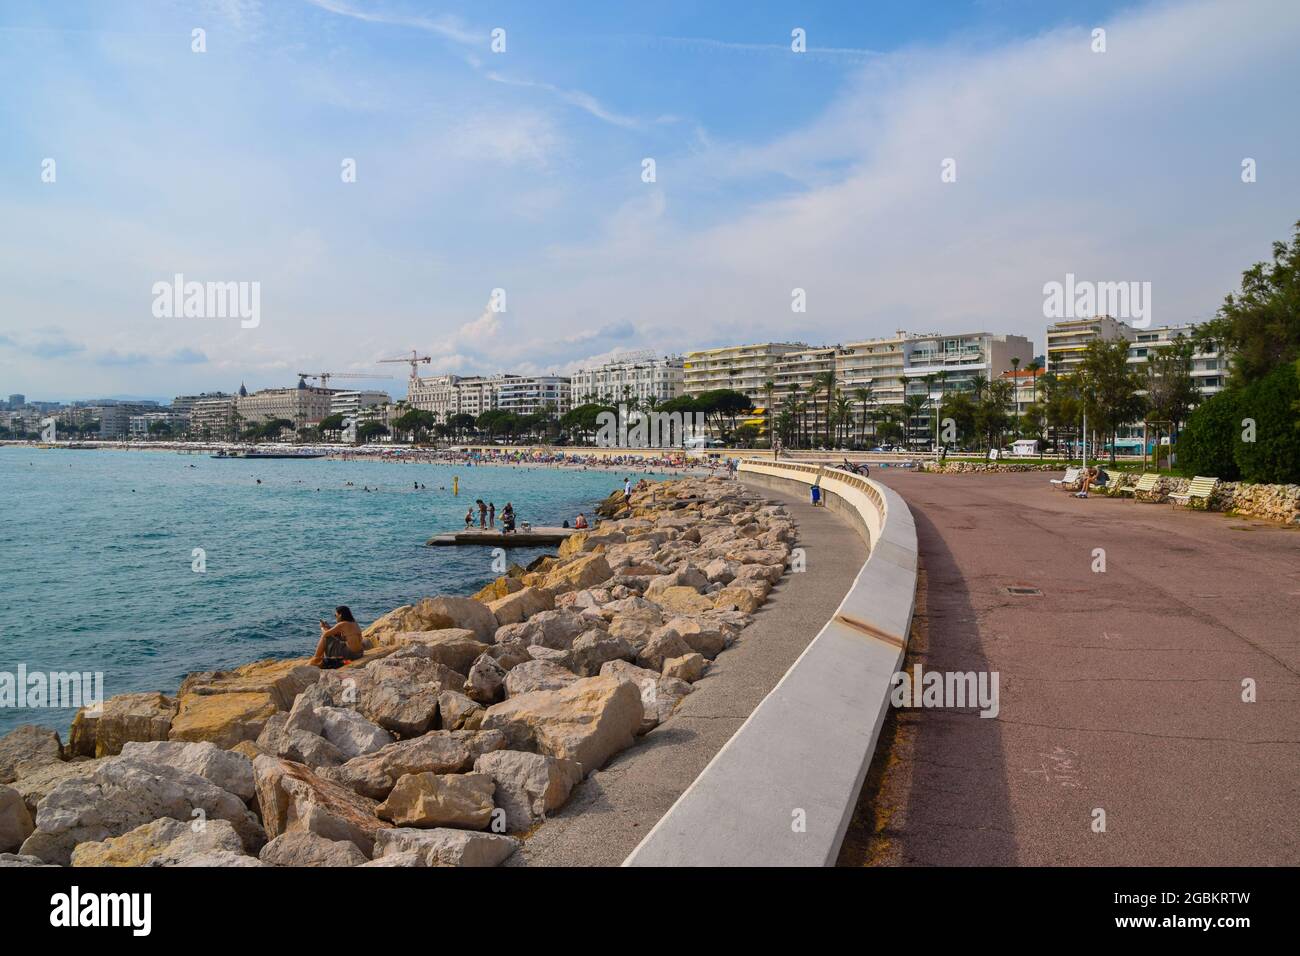 Coast and promenade view, Cannes, South of France Stock Photo - Alamy